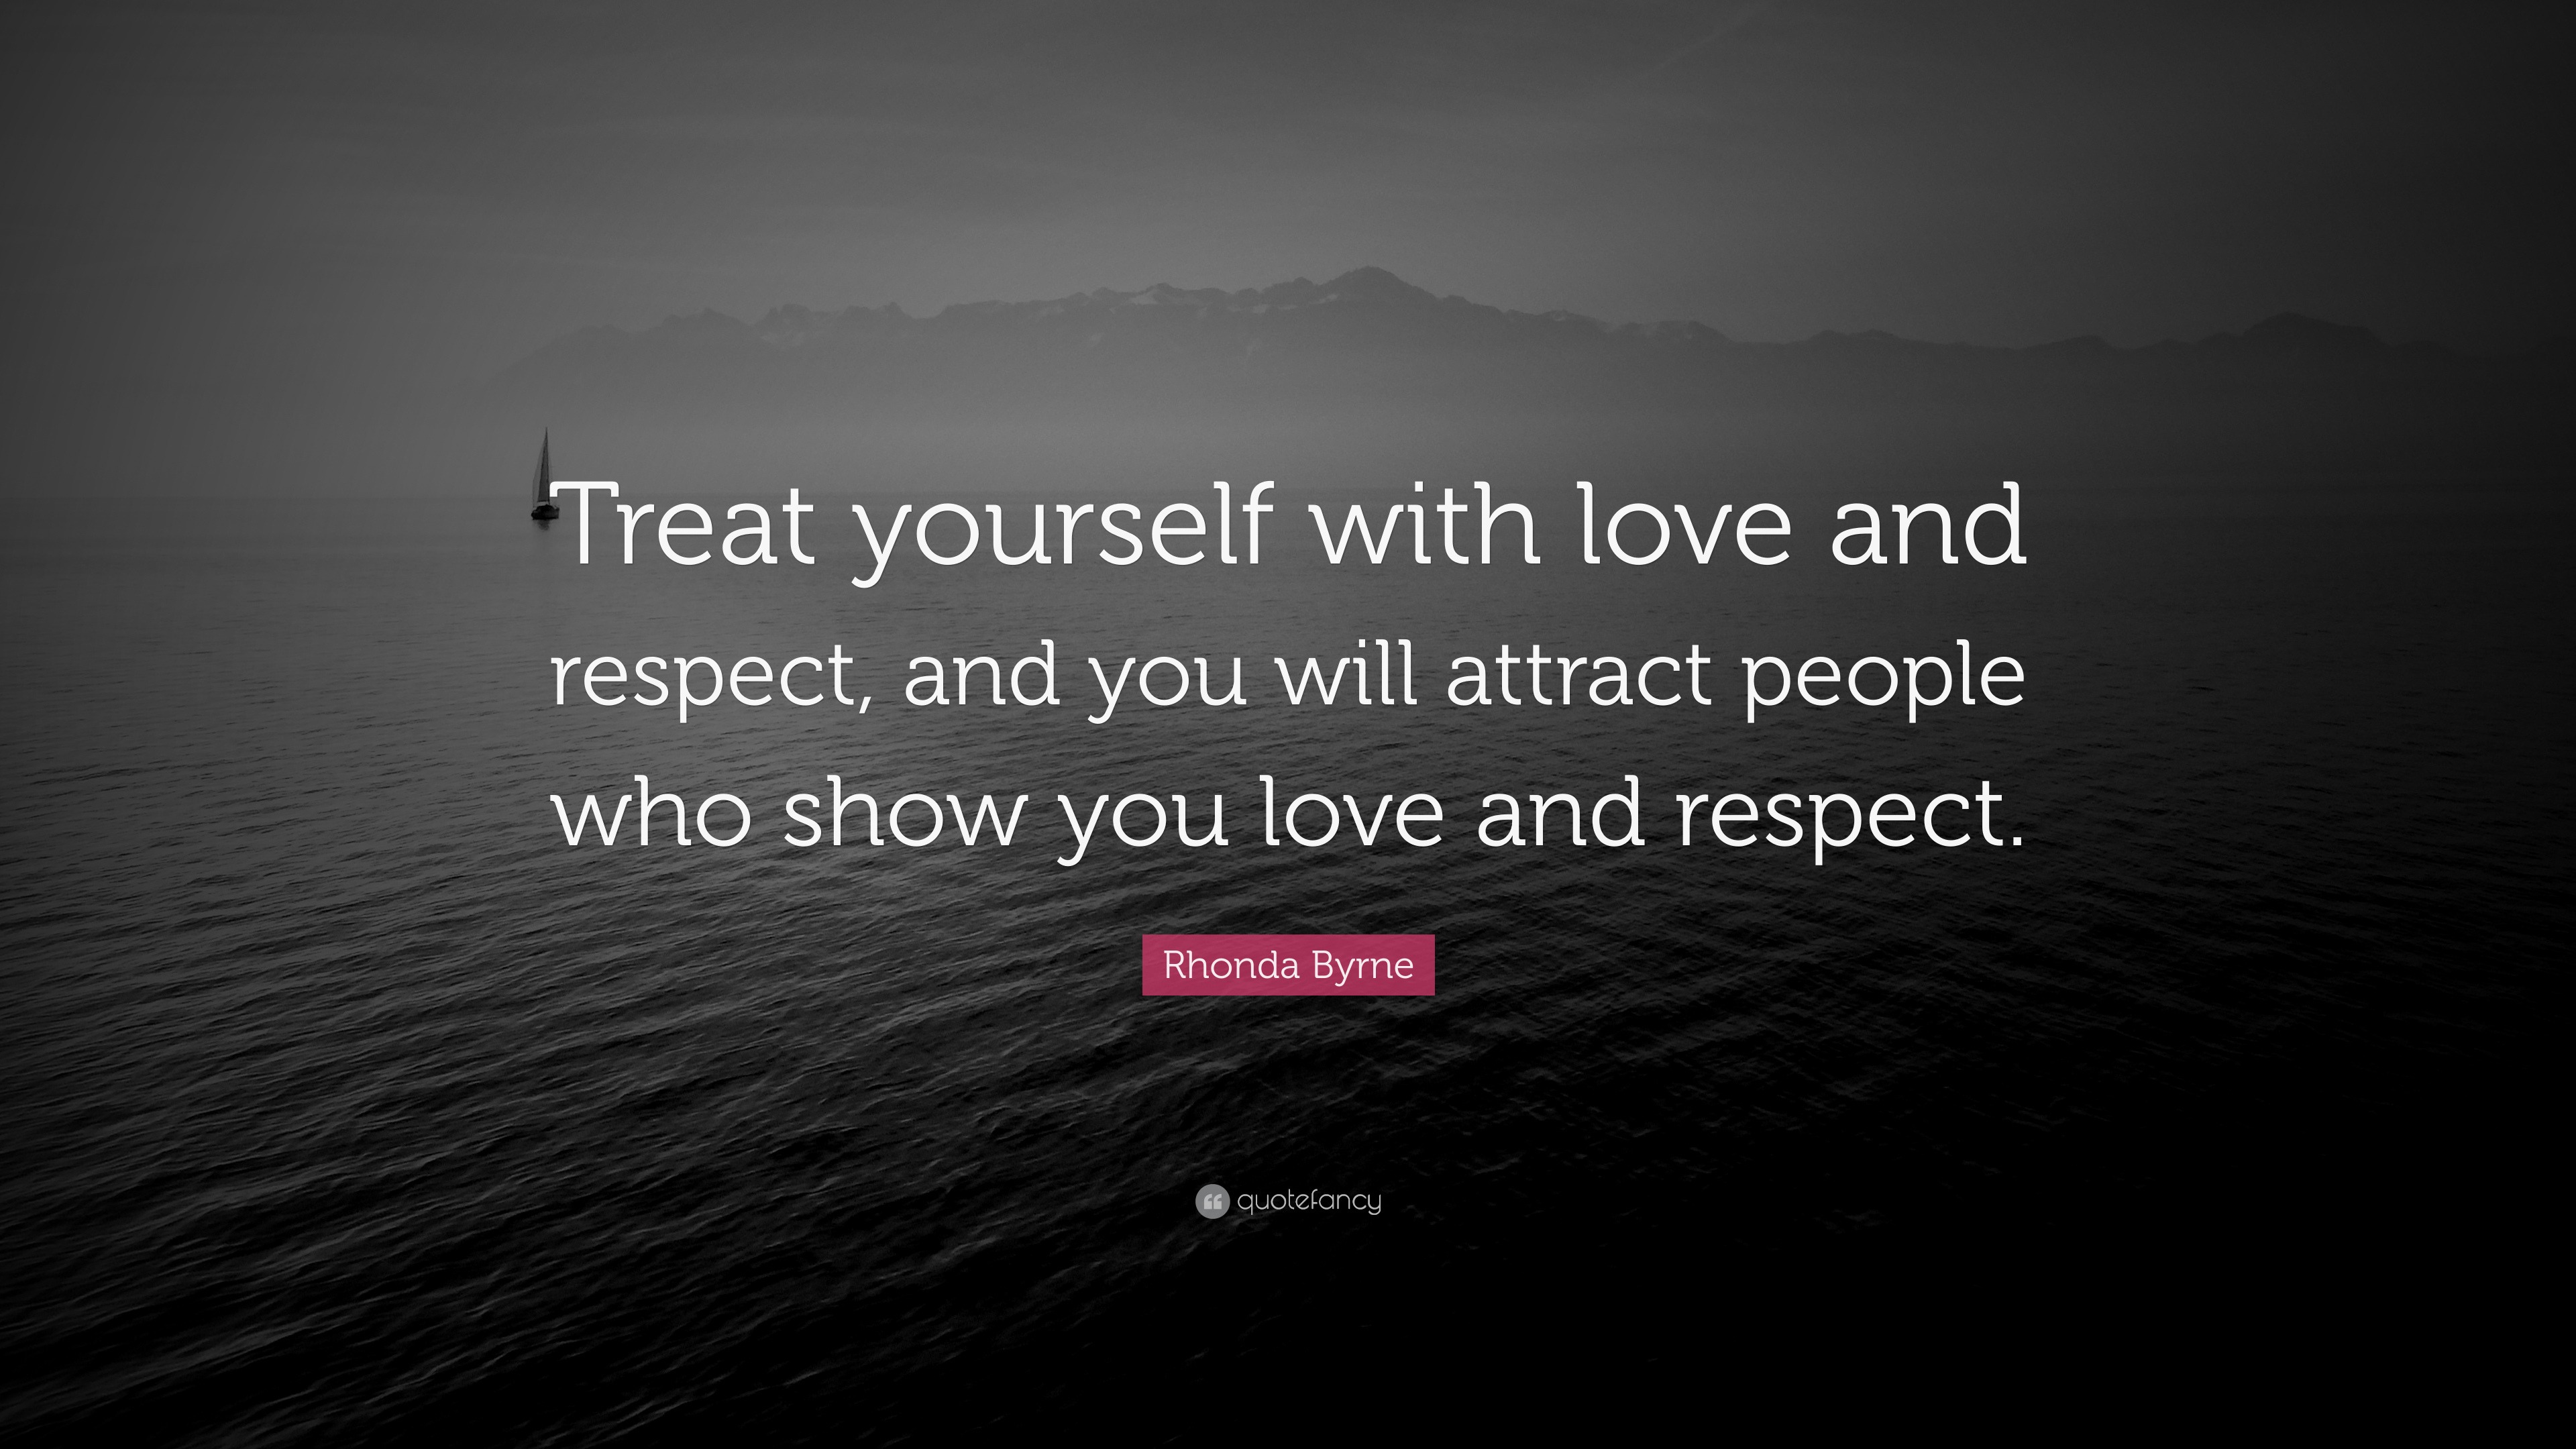 Rhonda Byrne Quote “treat Yourself With Love And Respect And You Will Attract People Who Show 2529